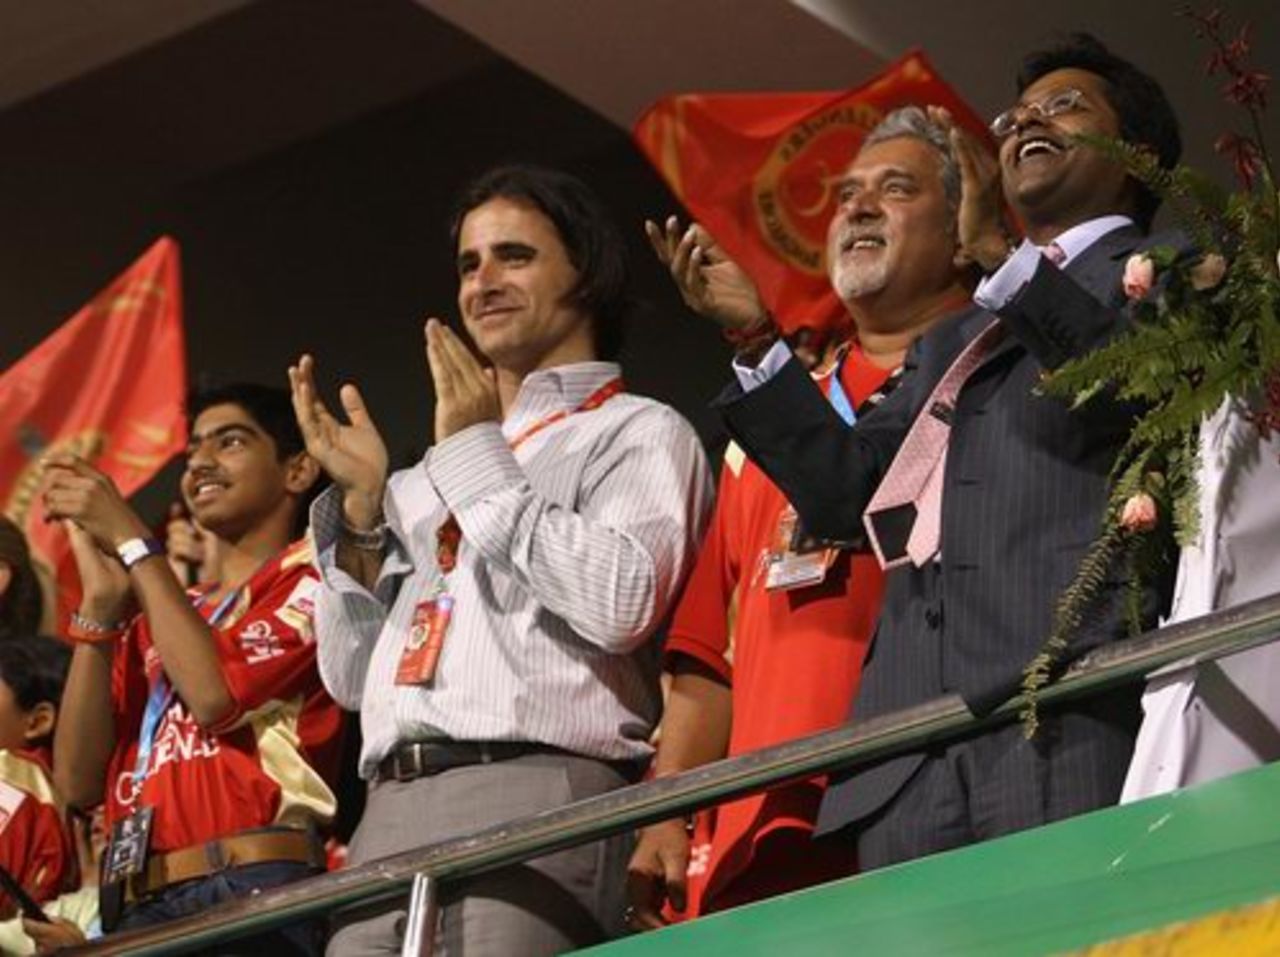 (From left) Dean Kino, head of the Champions League governing council, Bangalore Royal Challengers owner Vijay Mallya, and Lalit Modi, Chairman of the Champions League, applaud the action